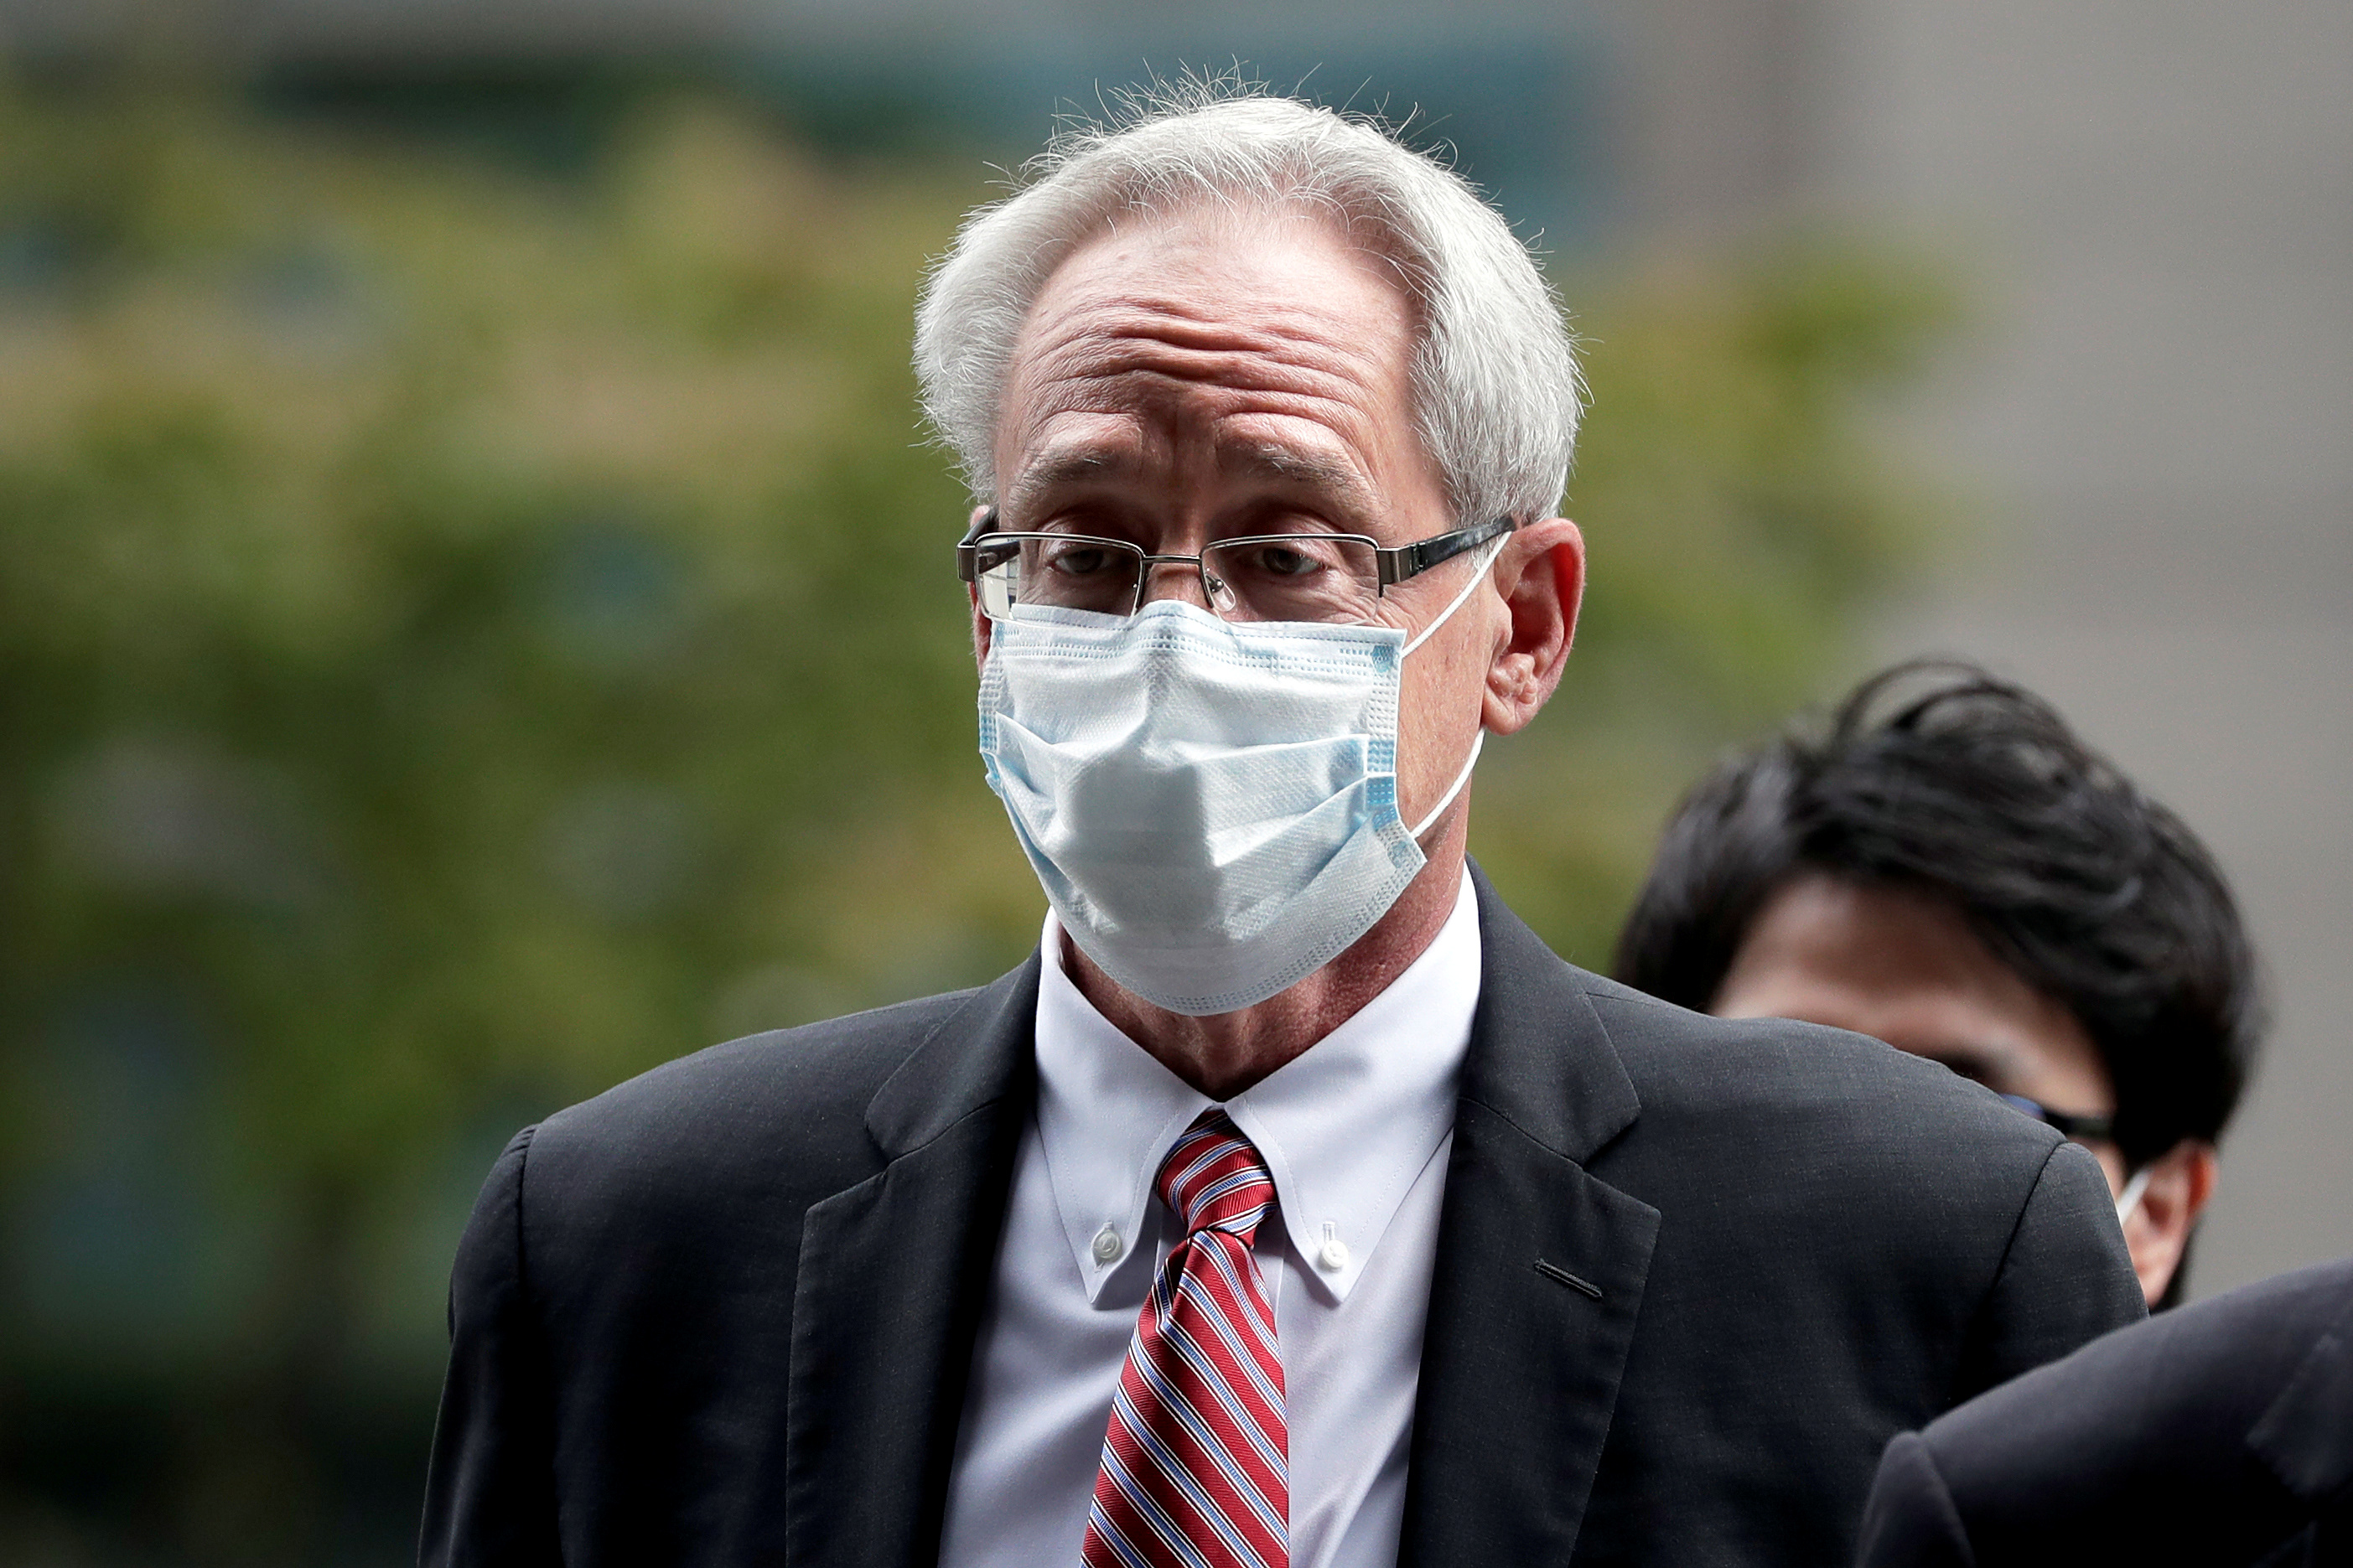 Greg Kelly, former representative director of Nissan Motor Co., arrives for the first trial hearing at the Tokyo District Court in Tokyo